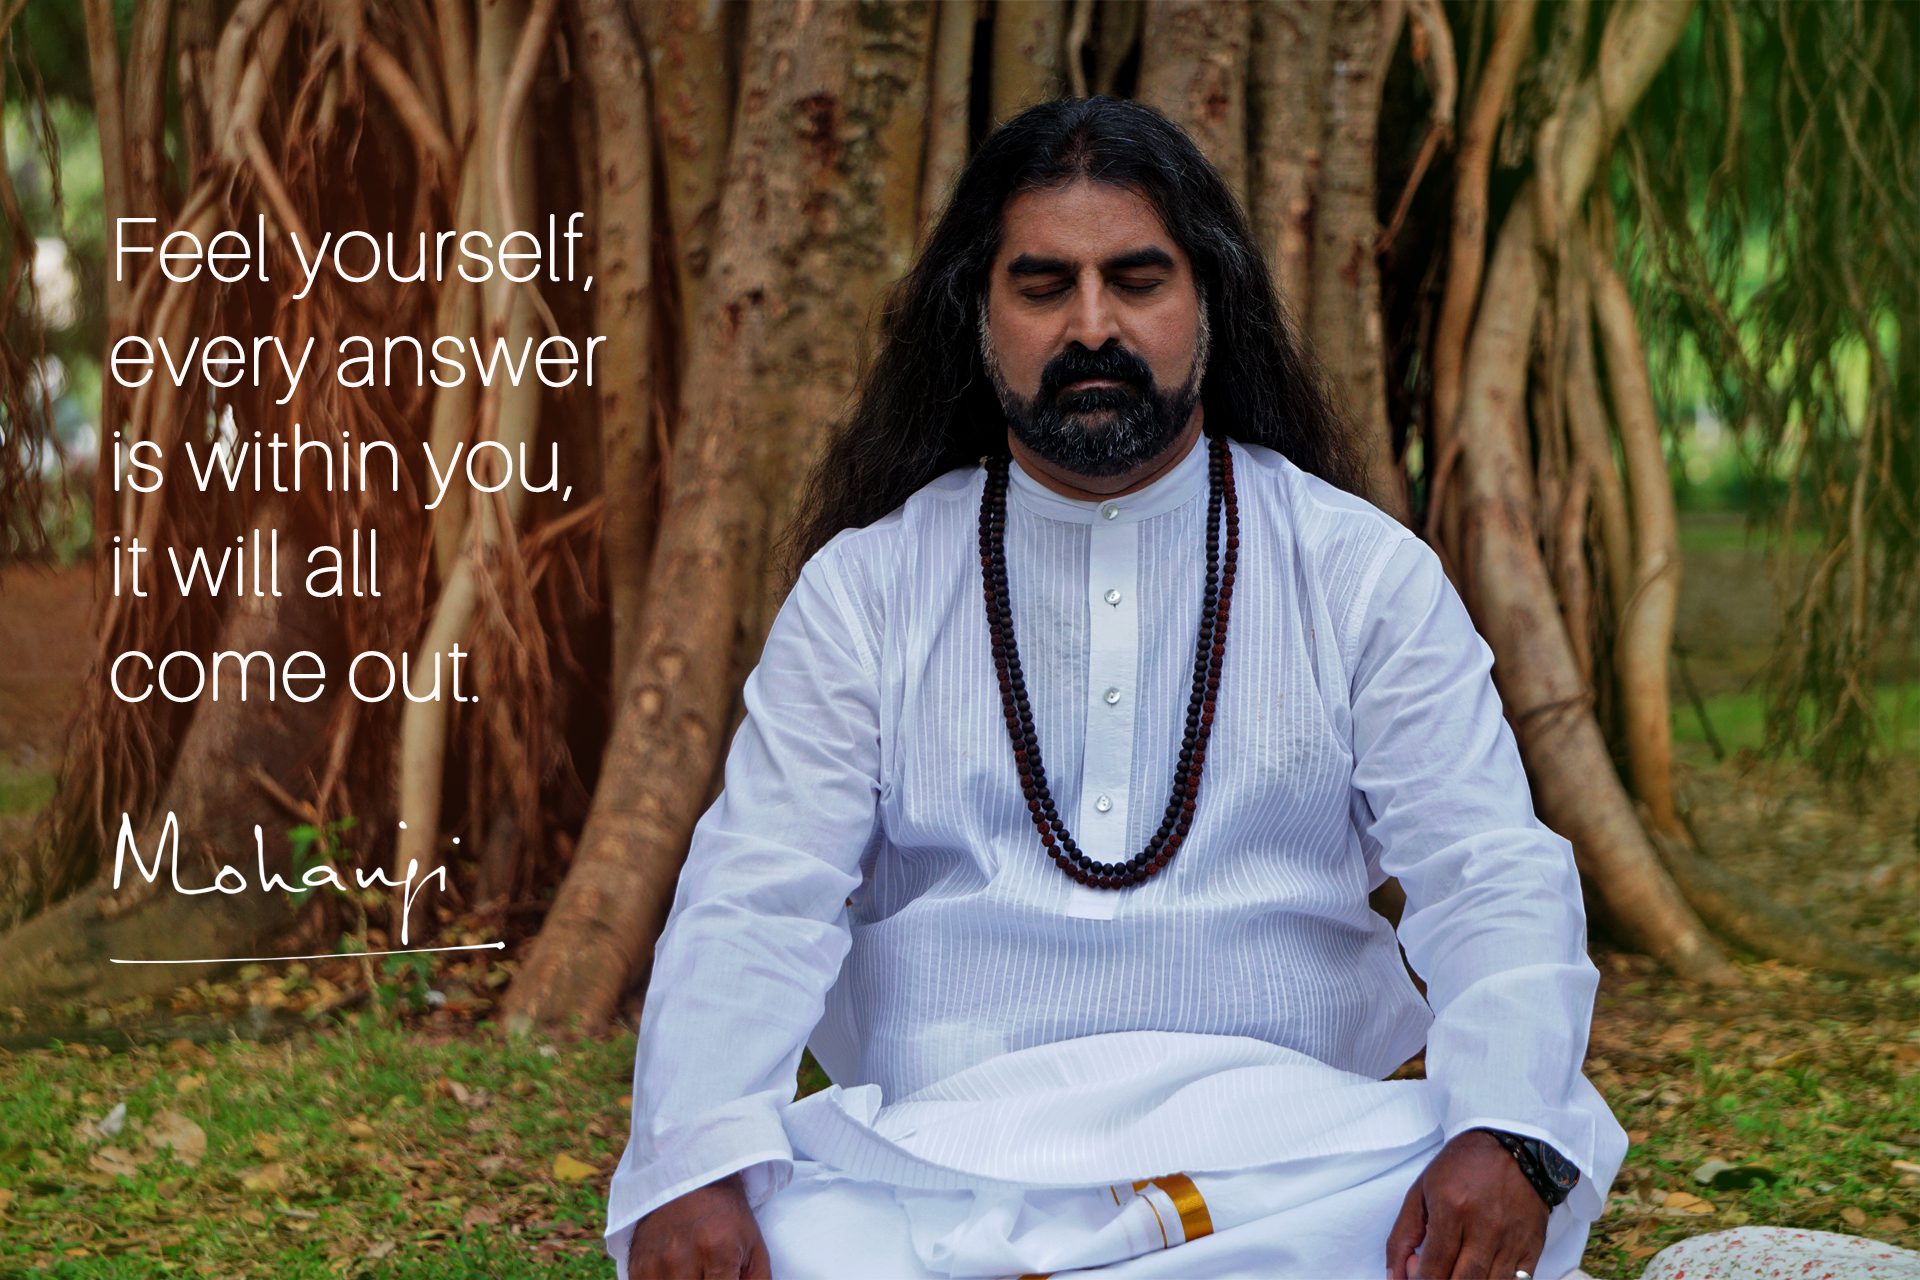 Mohanji quotes - Feel yourself, every answer is within you